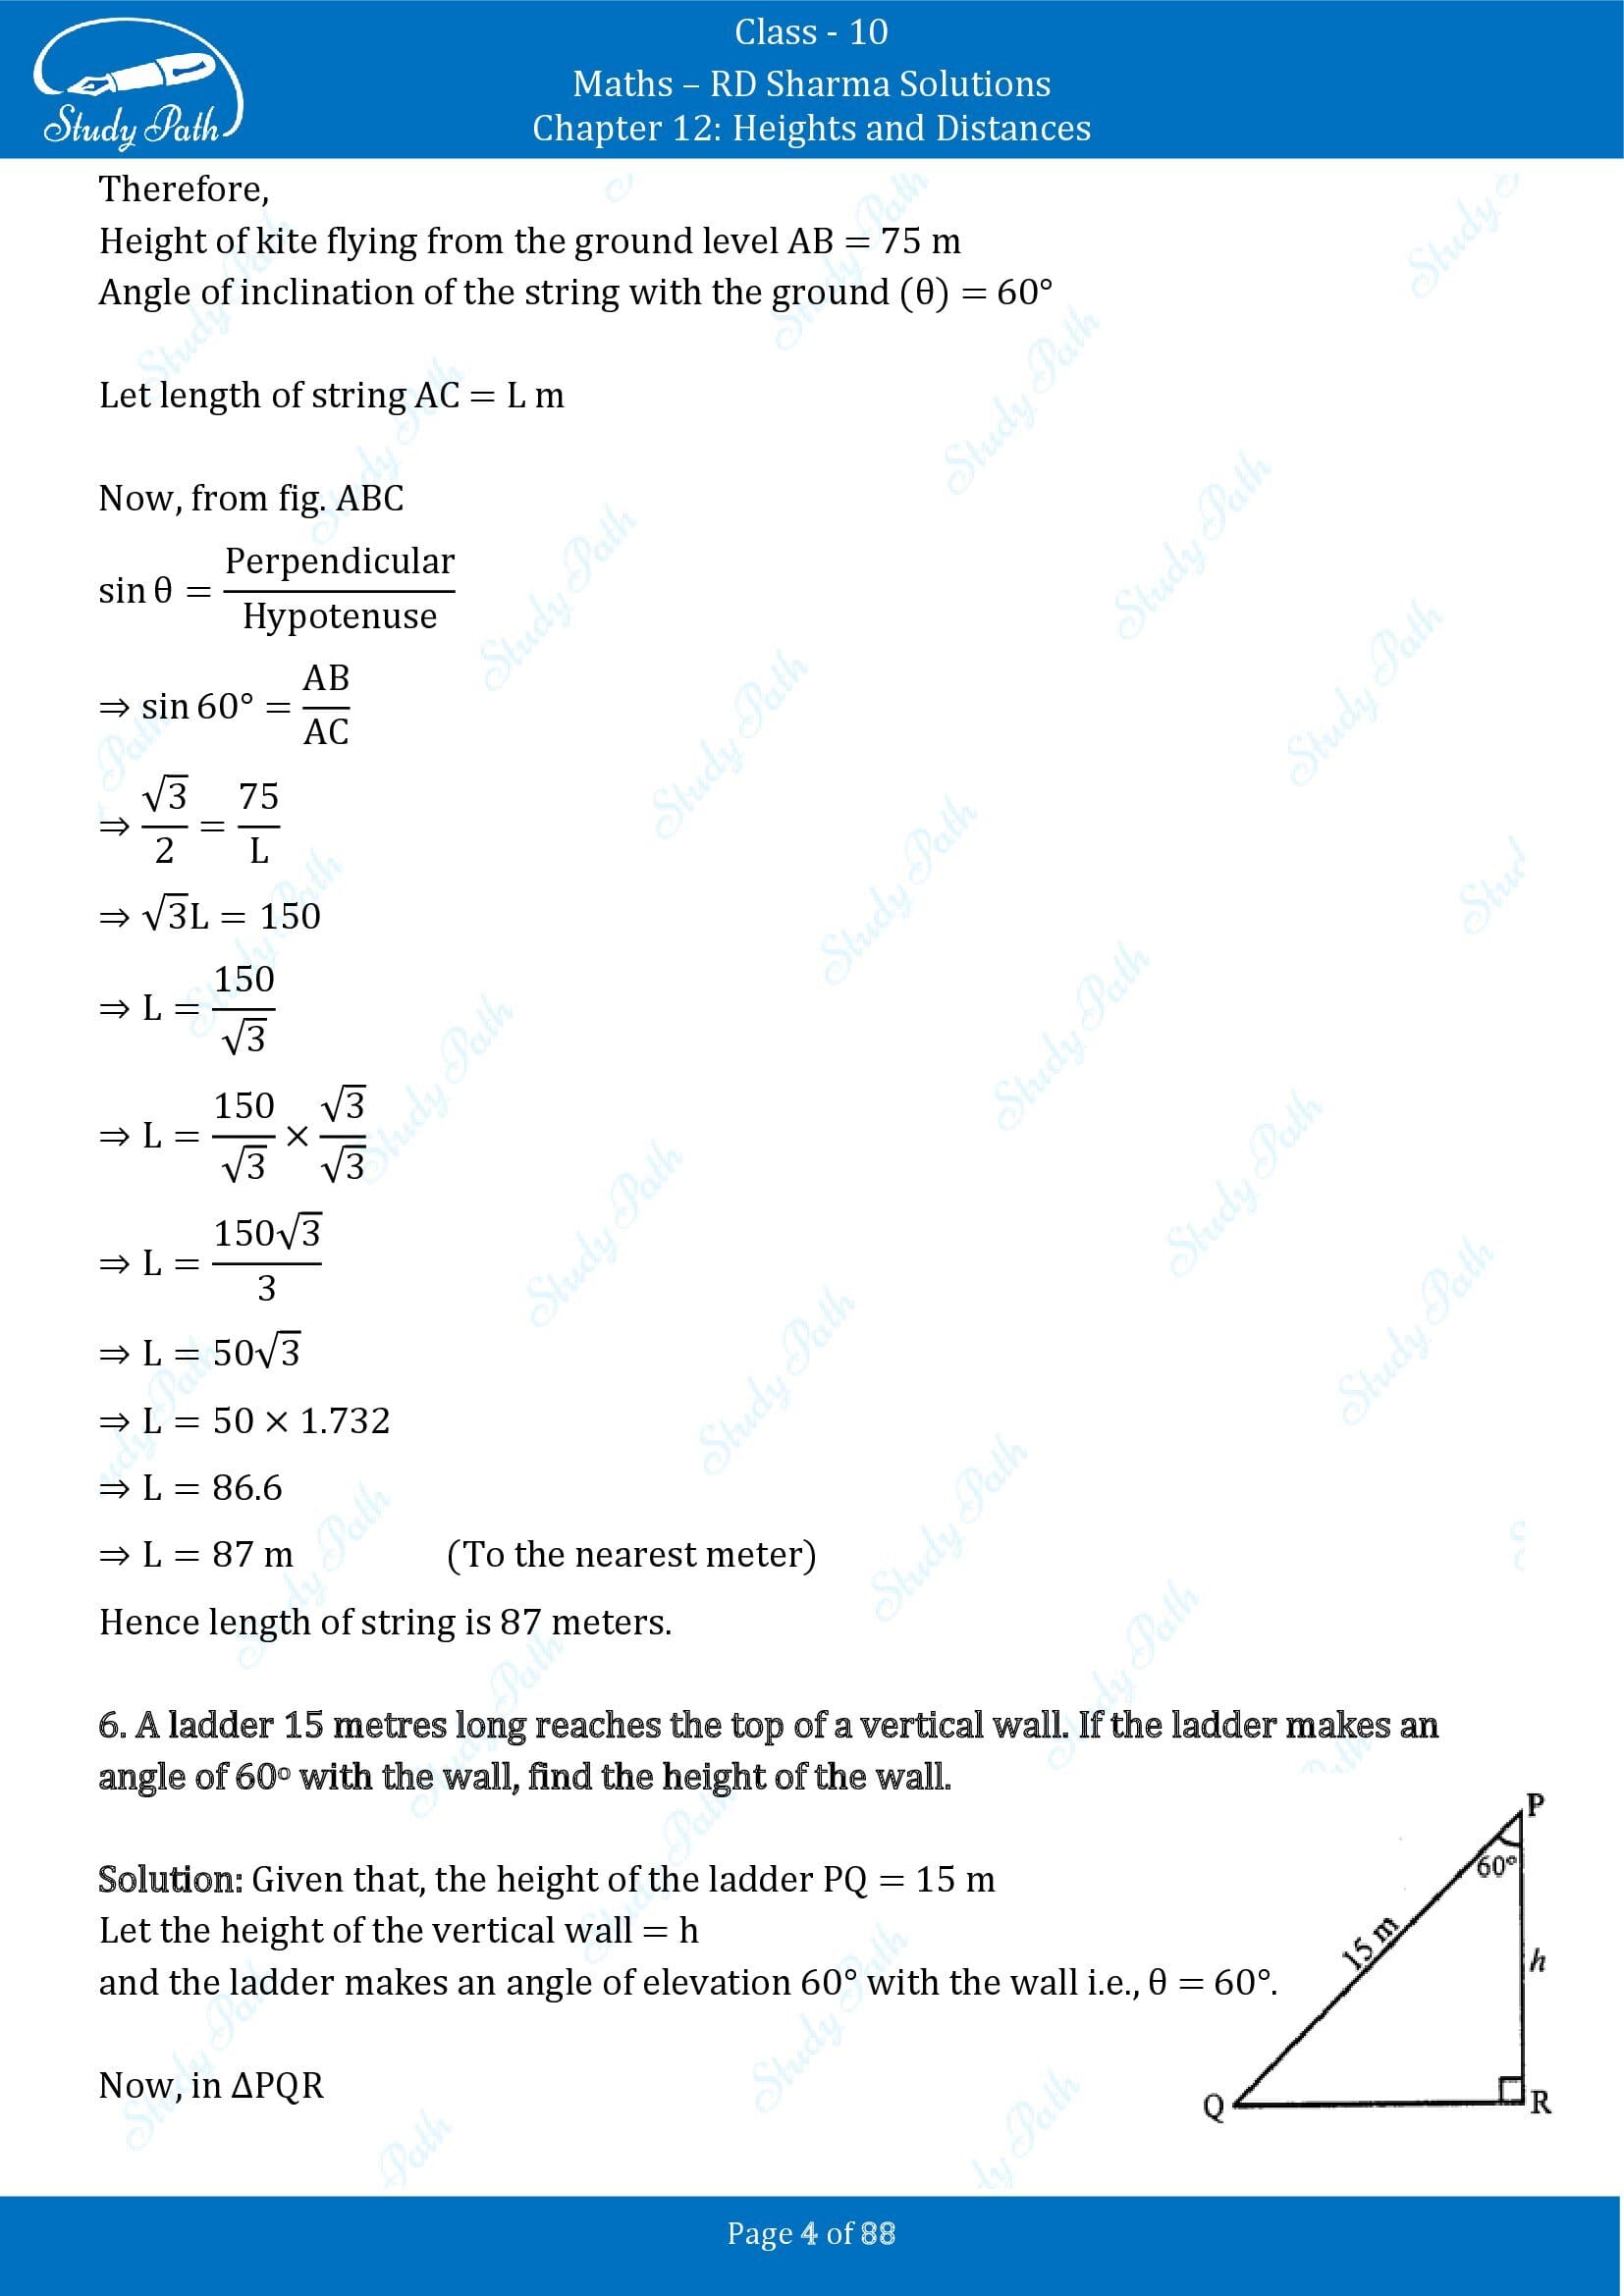 RD Sharma Solutions Class 10 Chapter 12 Heights and Distances Exercise 12.1 00004